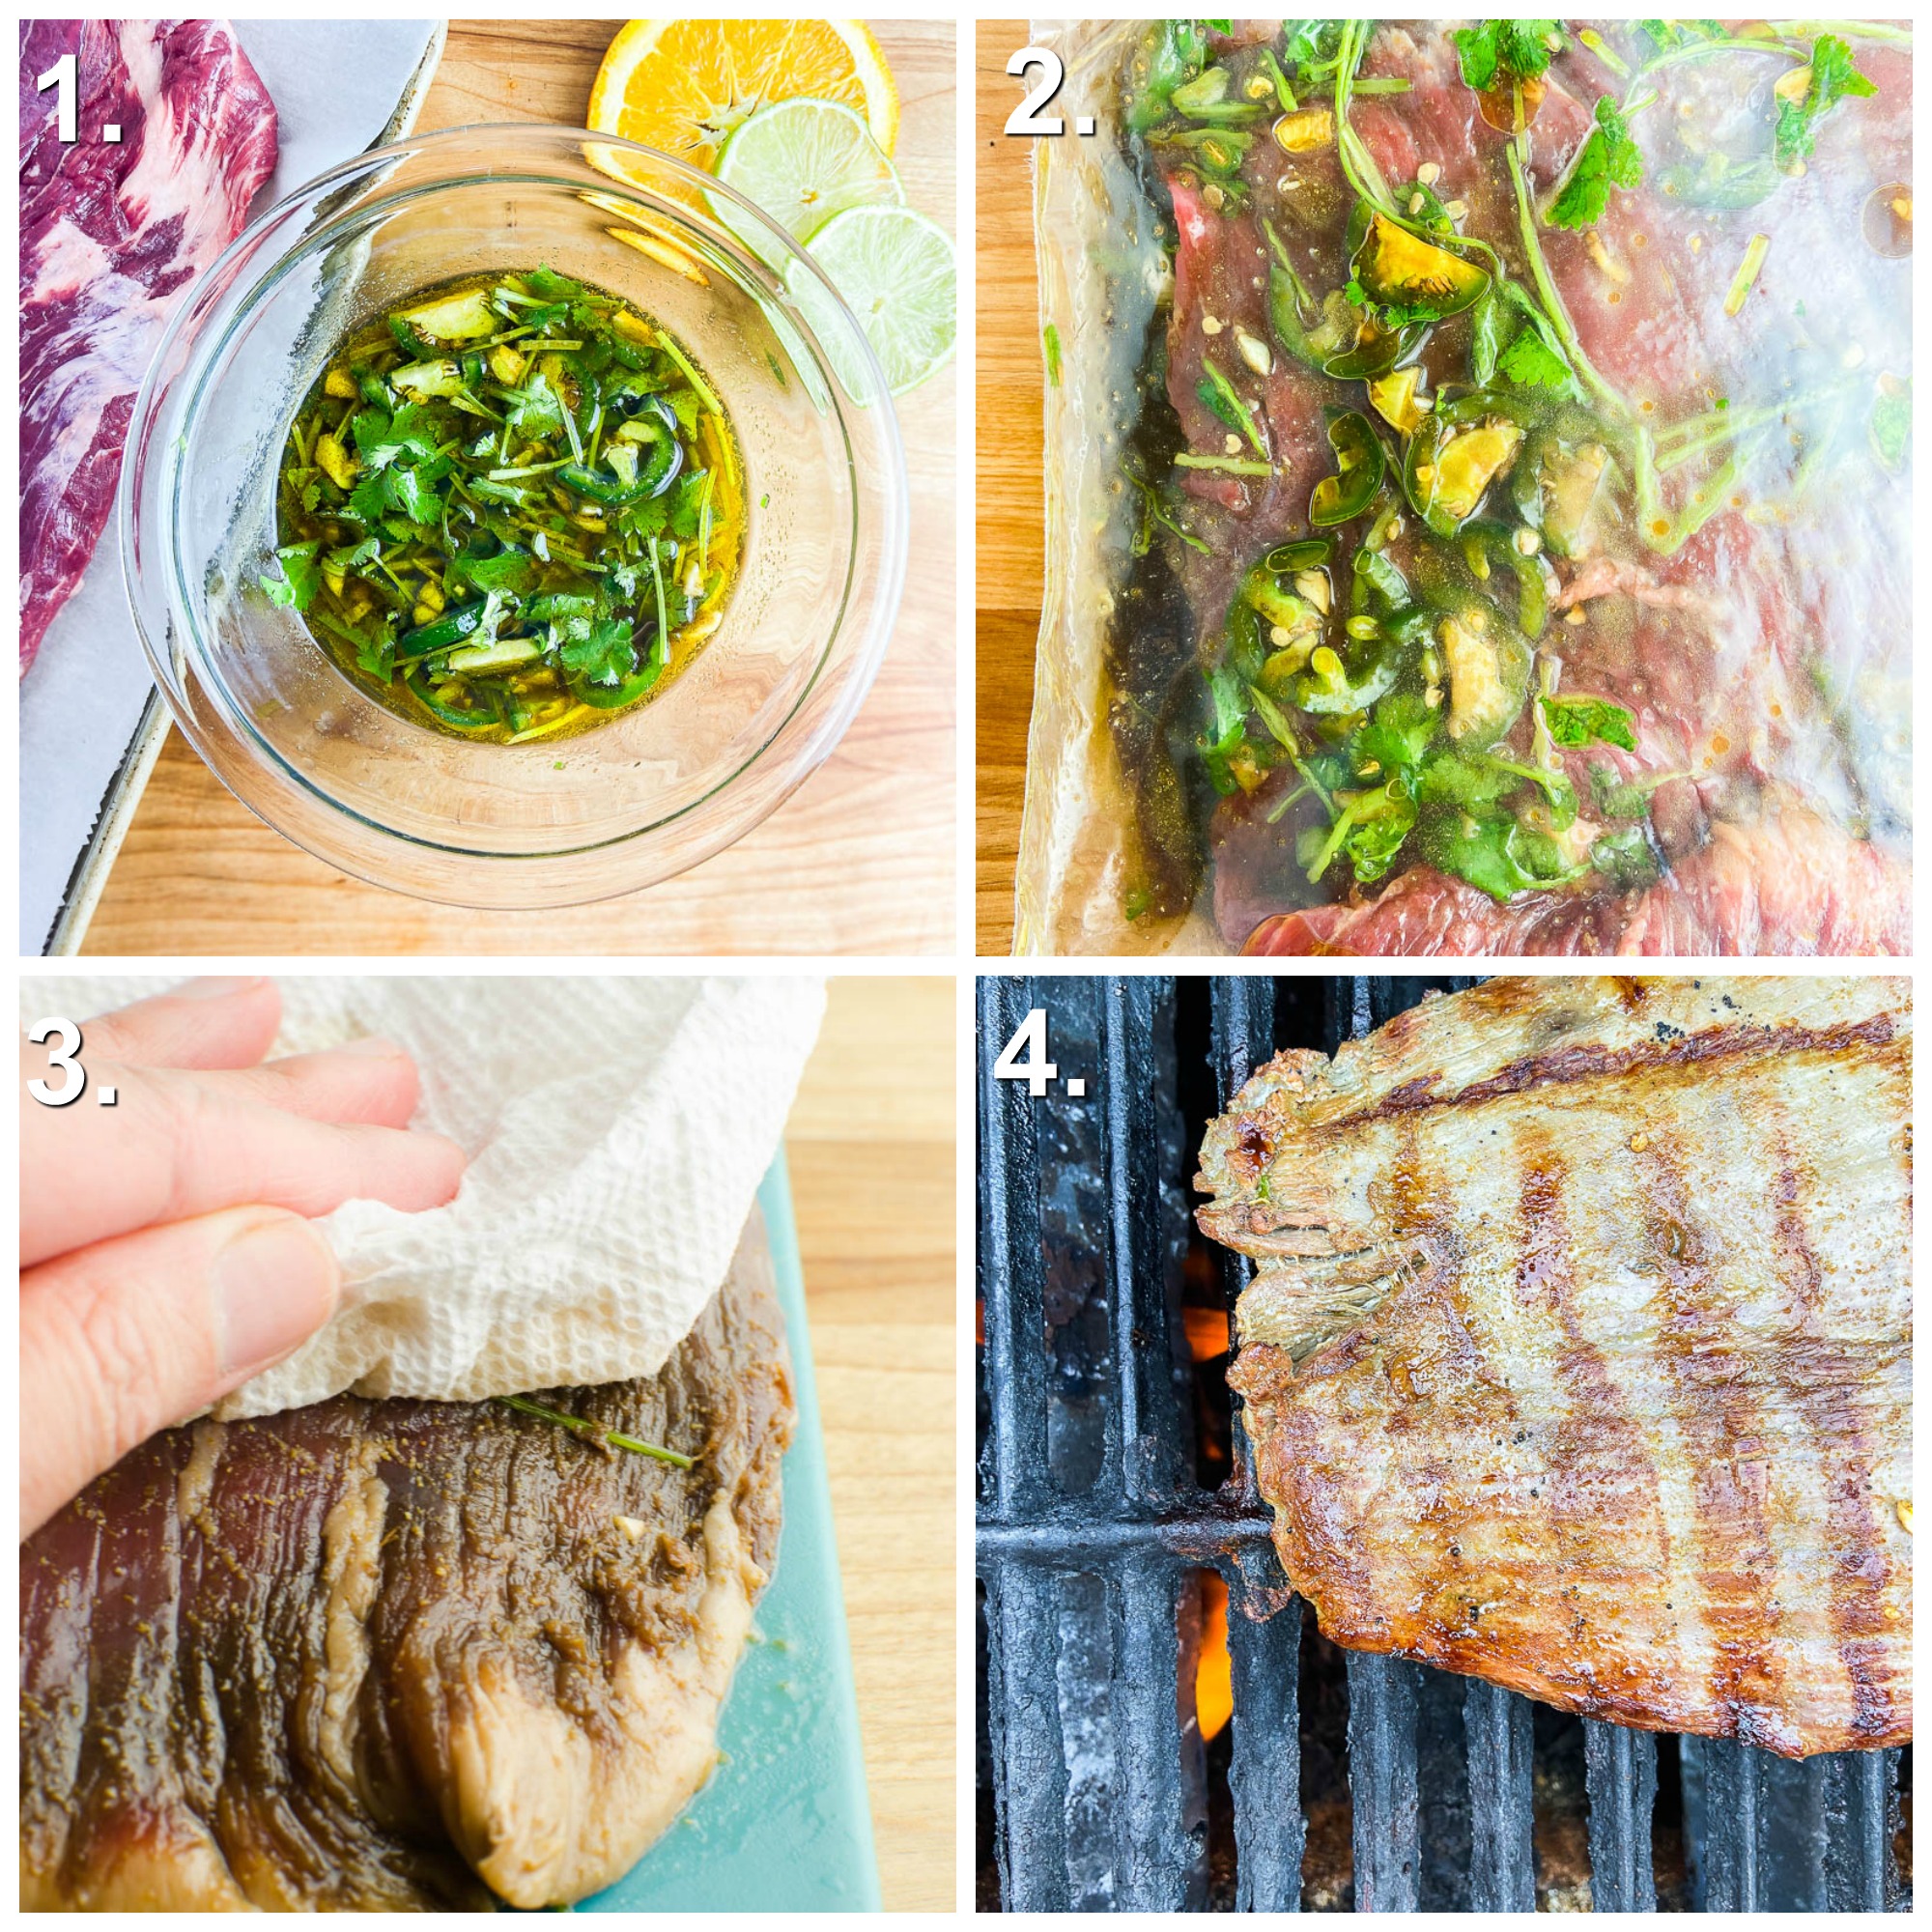 Step by Step Photos for Making Authentic Carne Asada